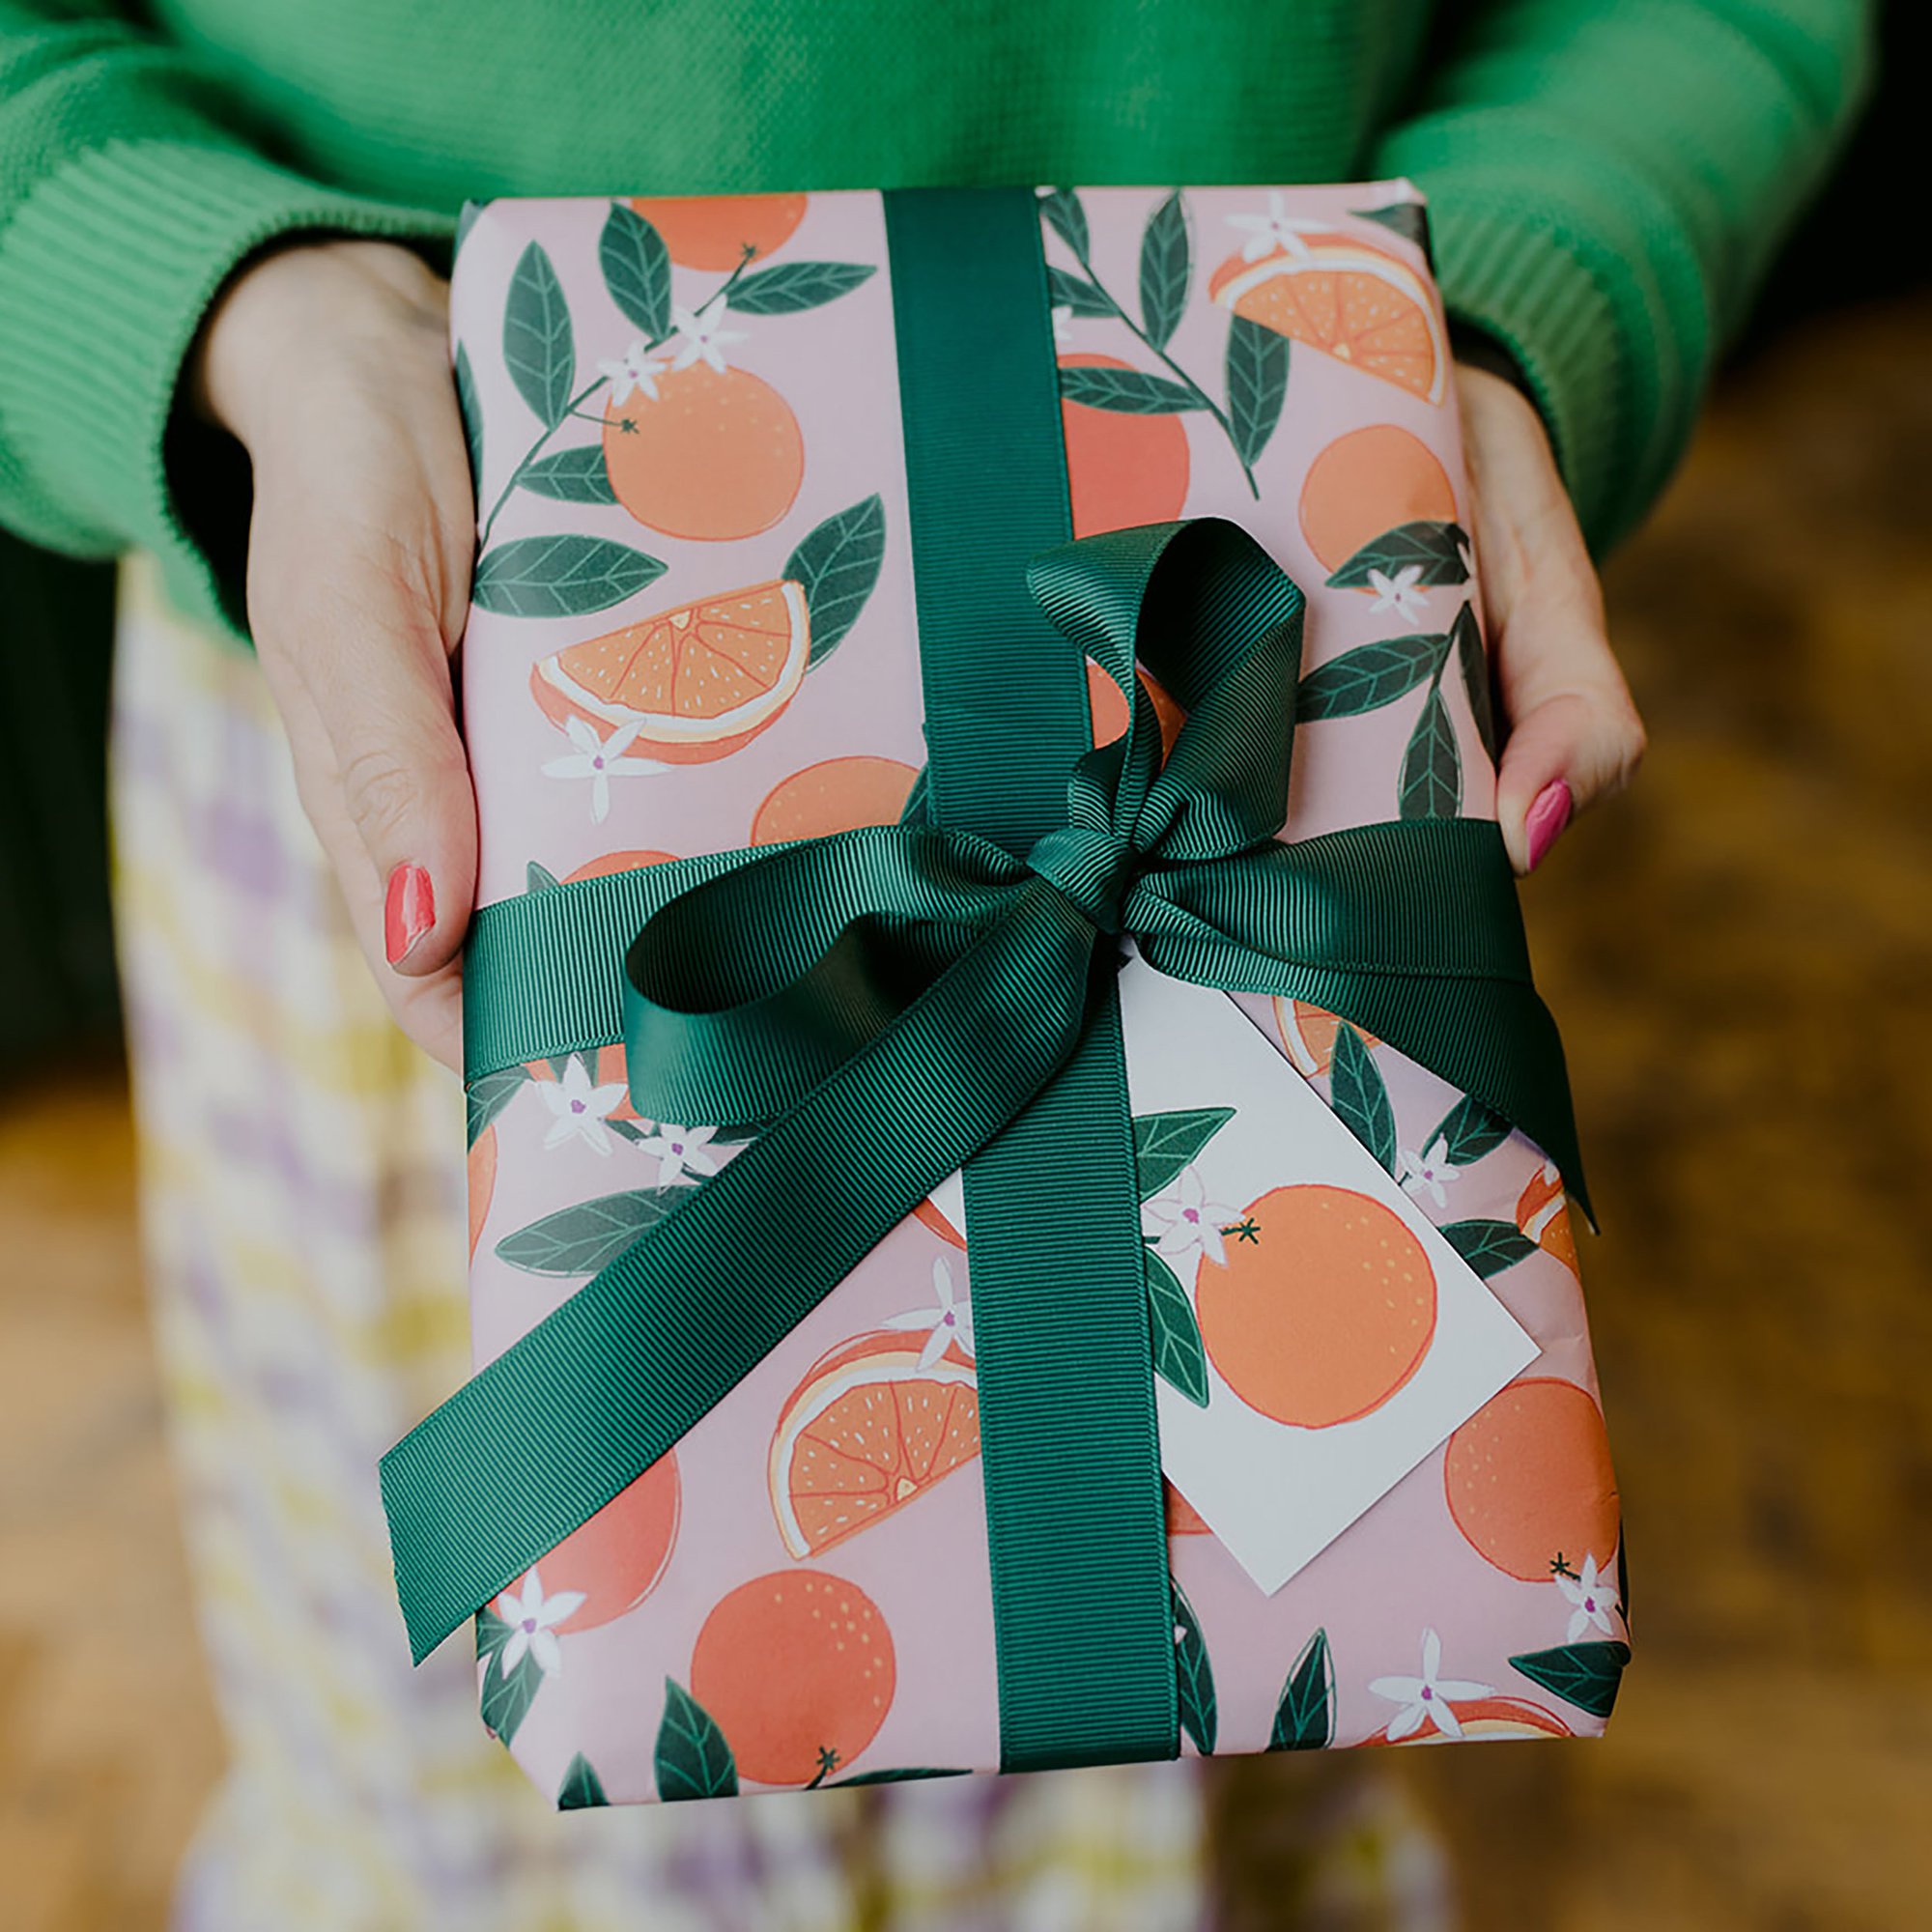 Sevilla Oranges Wrapping Paper